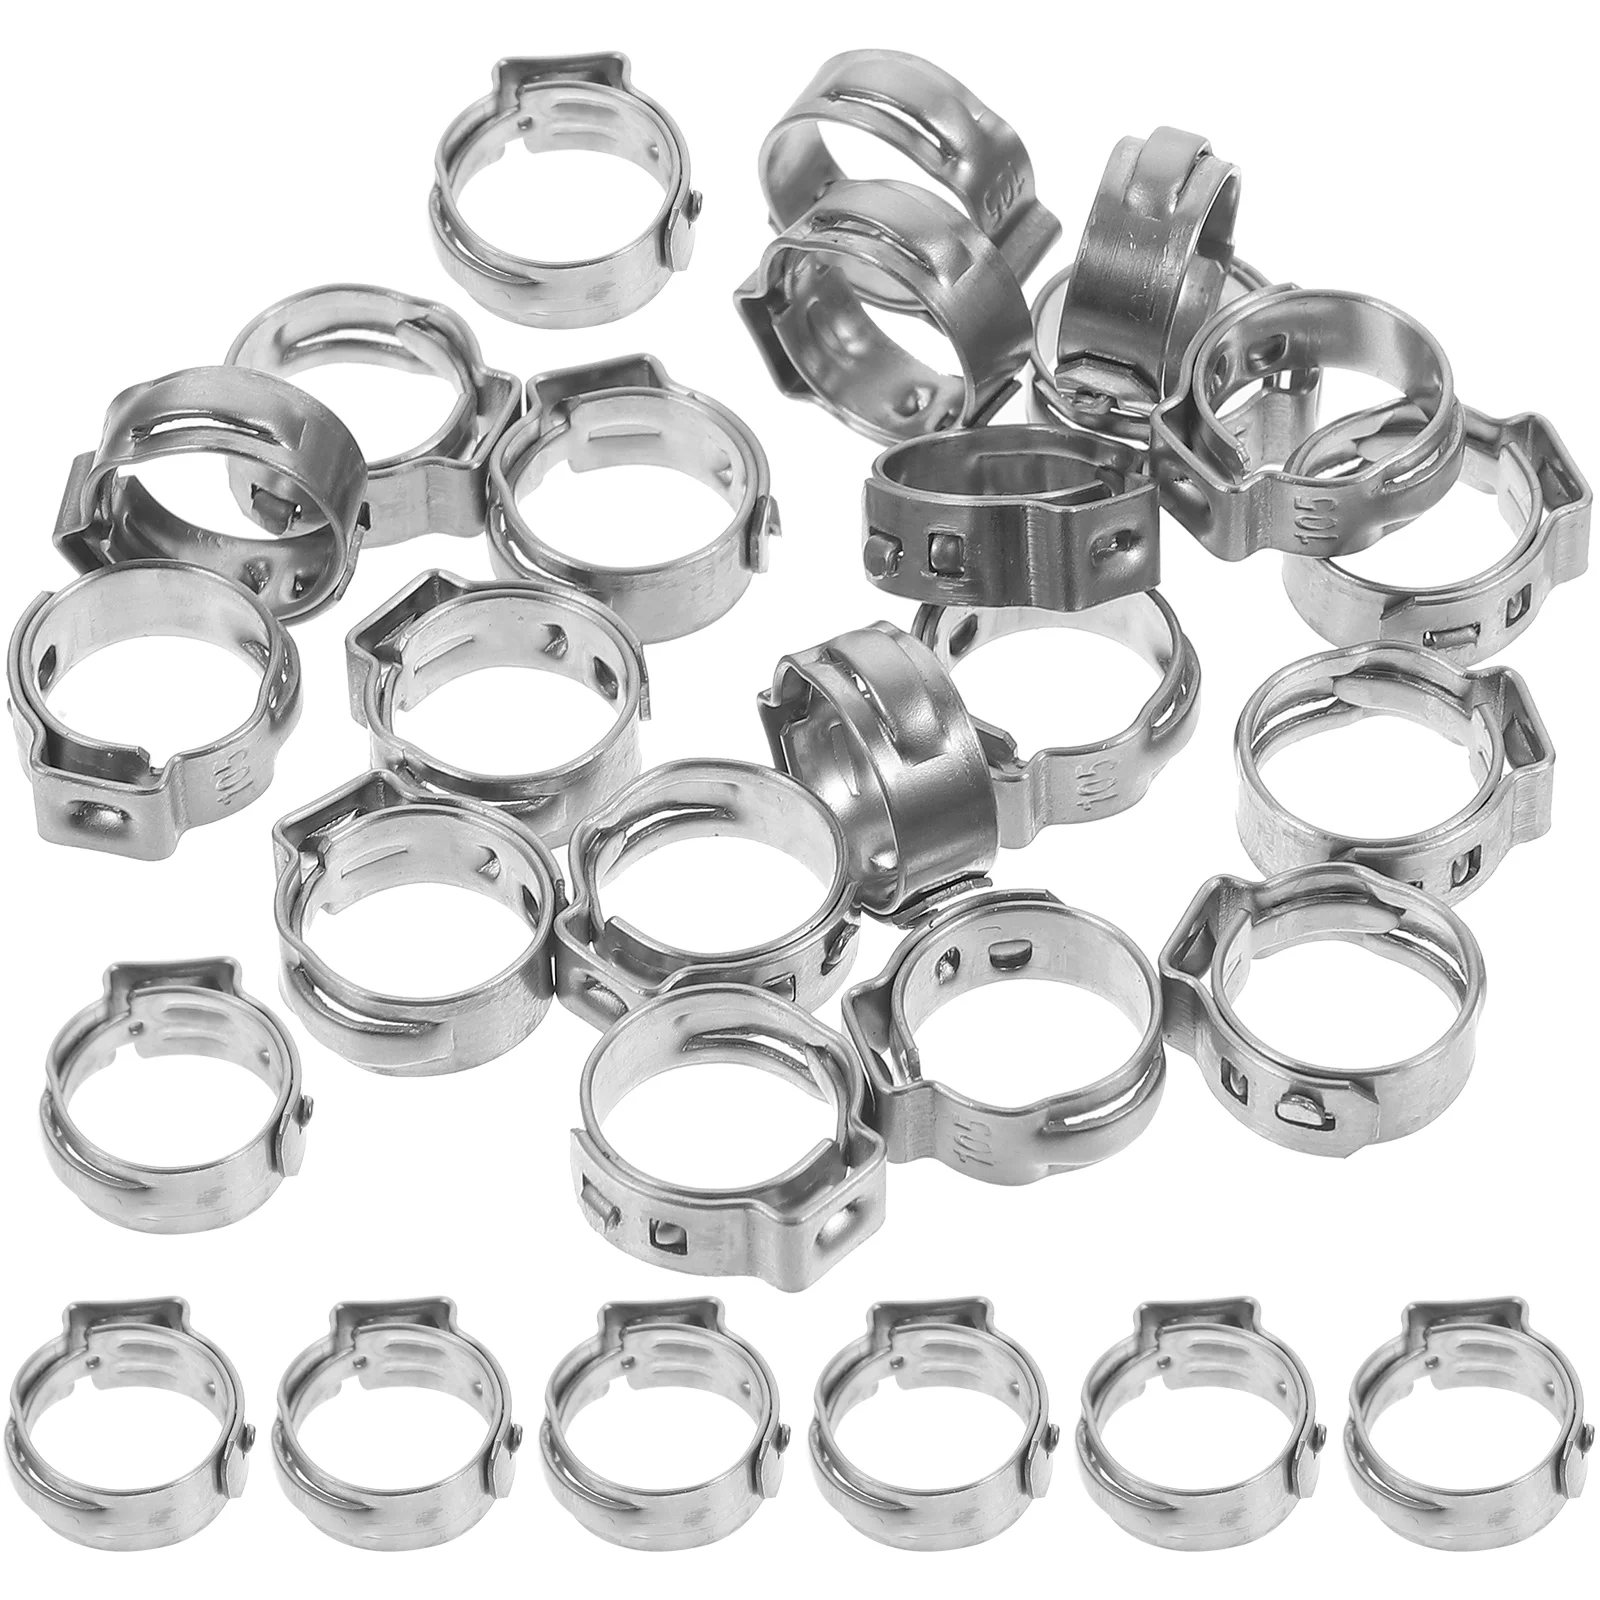 

Clamps Hose Clamp Pex Worm Stainless Steel Gear Drive Tool Clip Plumbing Assortment Cliips Fittings Wire Pinch Crimp Rings